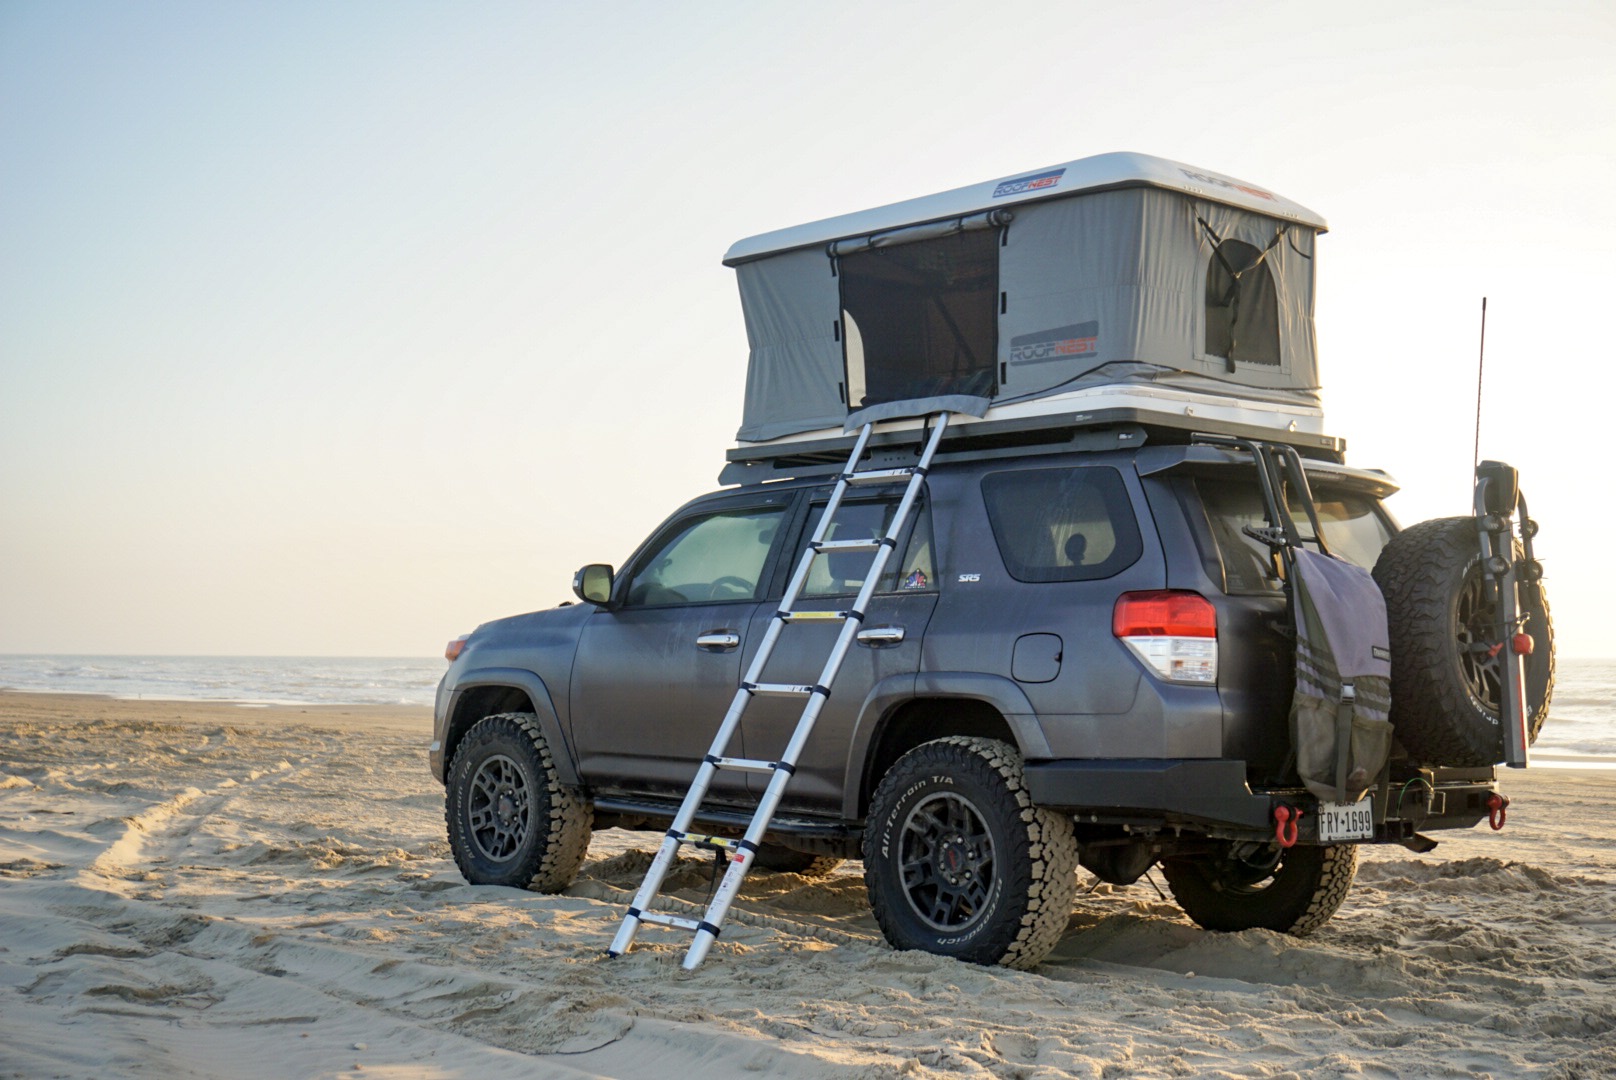 Roofnest camping